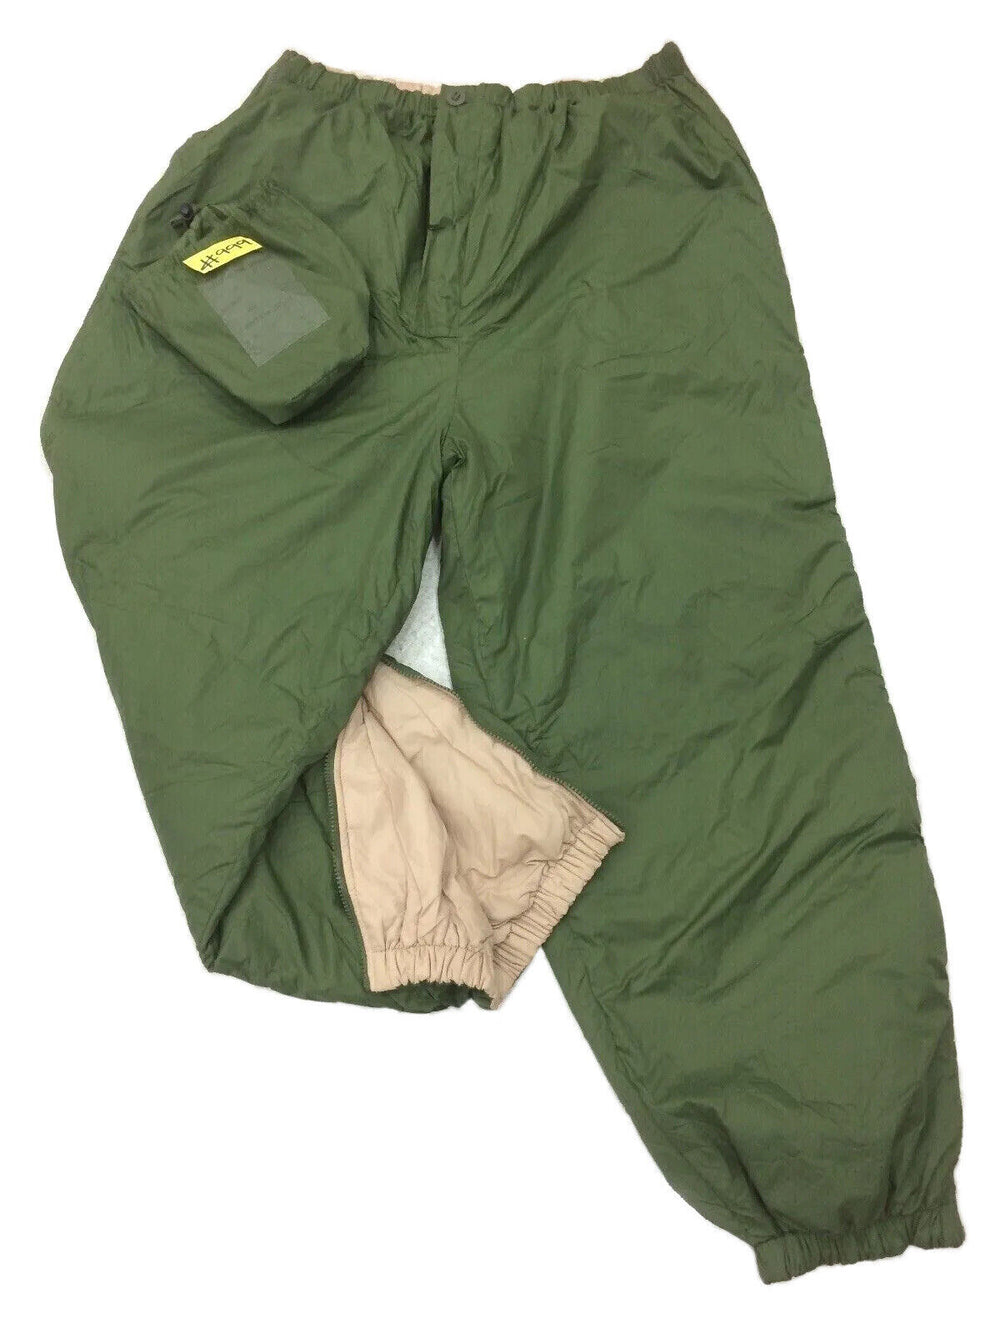 British Military Extreme Cold weather reversable Softie  trousers Used Grade 1